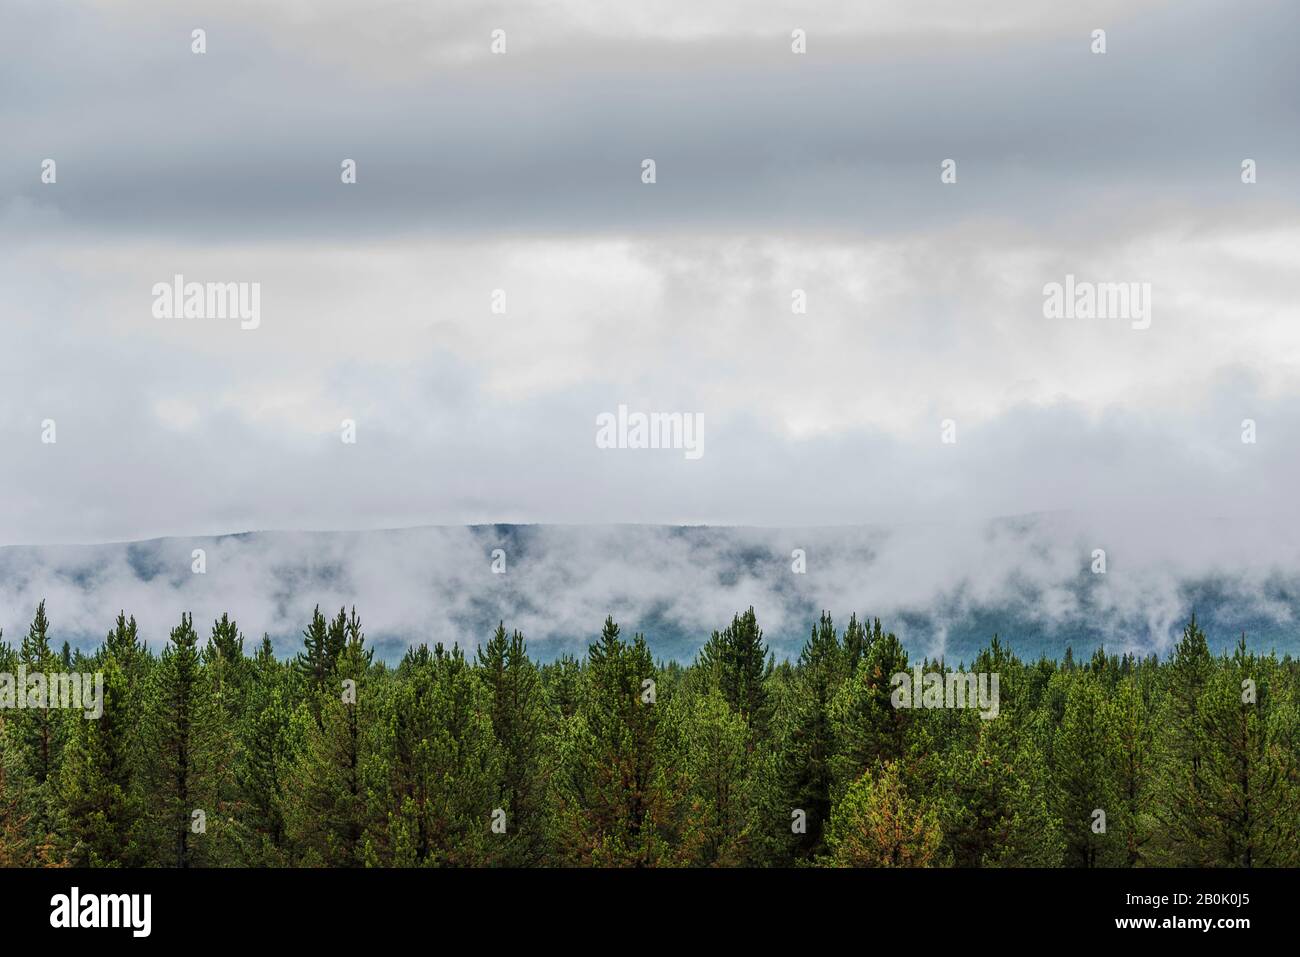 Green forest trees with low level clouds just above the trees. Stock Photo